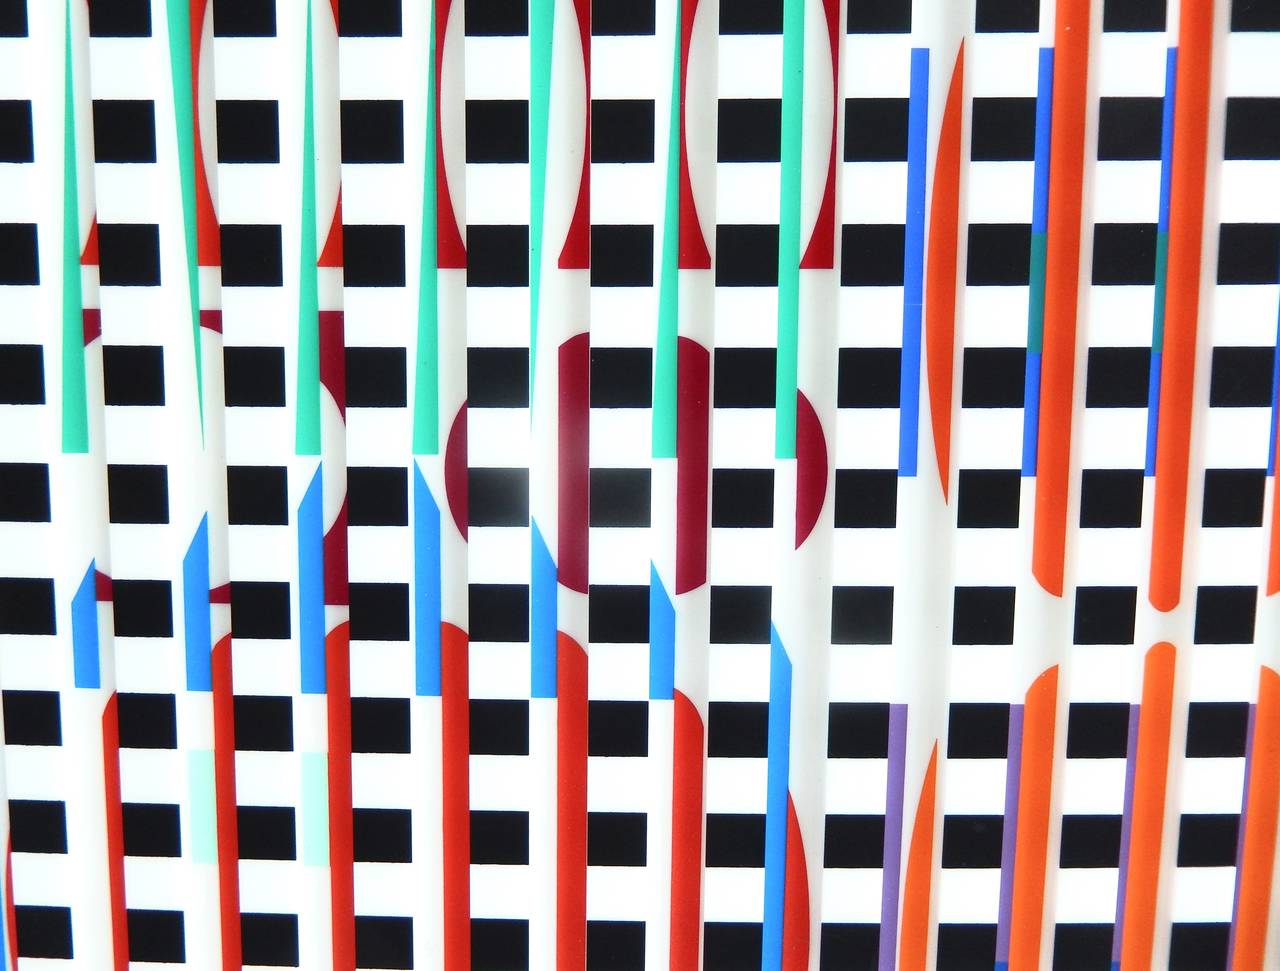 An op art, kinetic wall construction by Israeli artist Yaacov Agam (b. 1928).
A moveable grid of black and white squares reveals an image underneath, and allows the viewer to slide it across the work. The movement of the top screen displays an